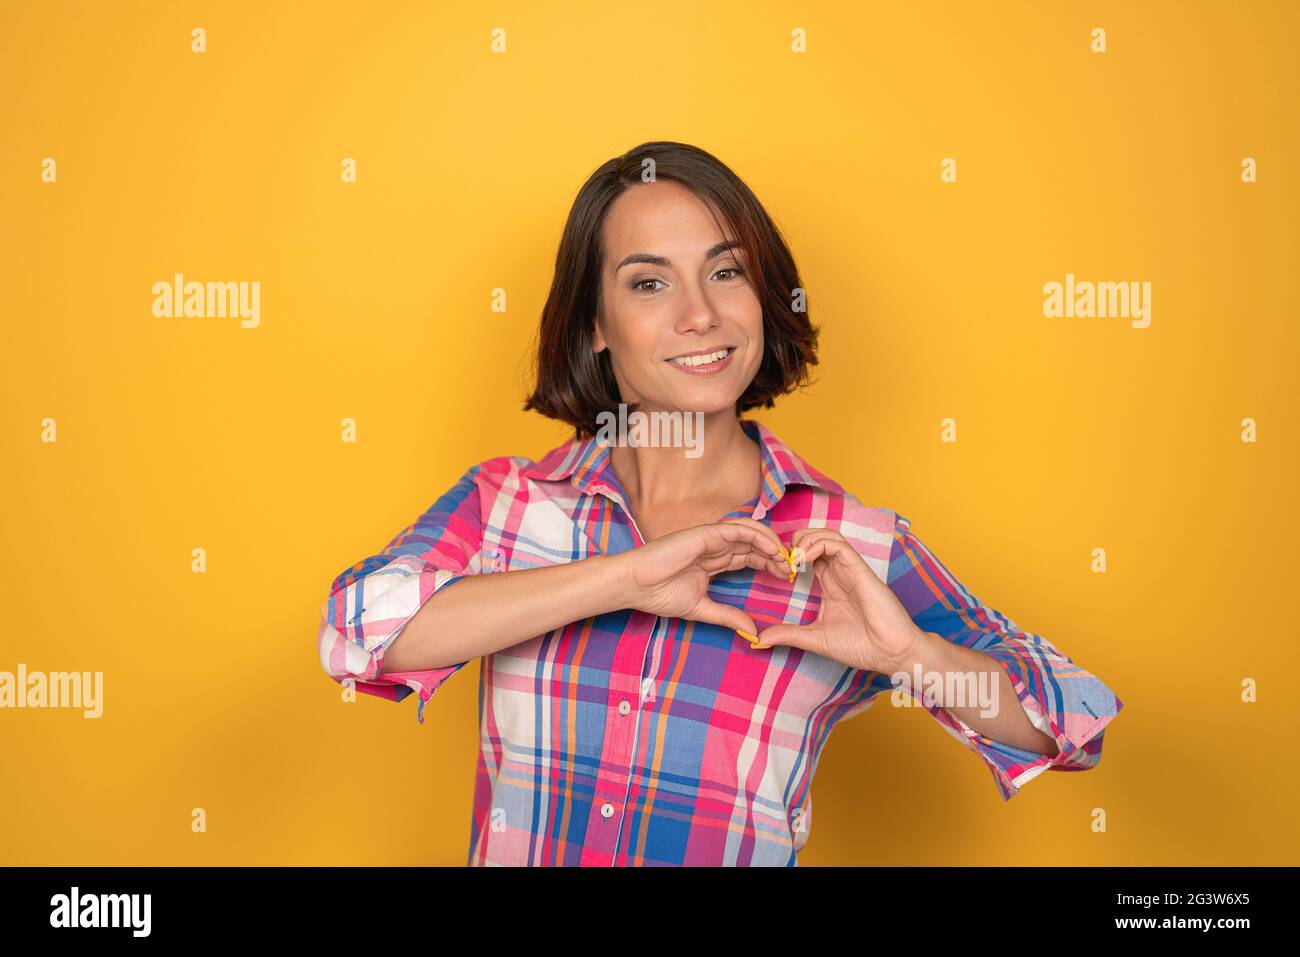 OK or Okay sign with one raised hand smile beautiful woman dressed in a plaid shirt and dark hair on yellow background. Human em Stock Photo